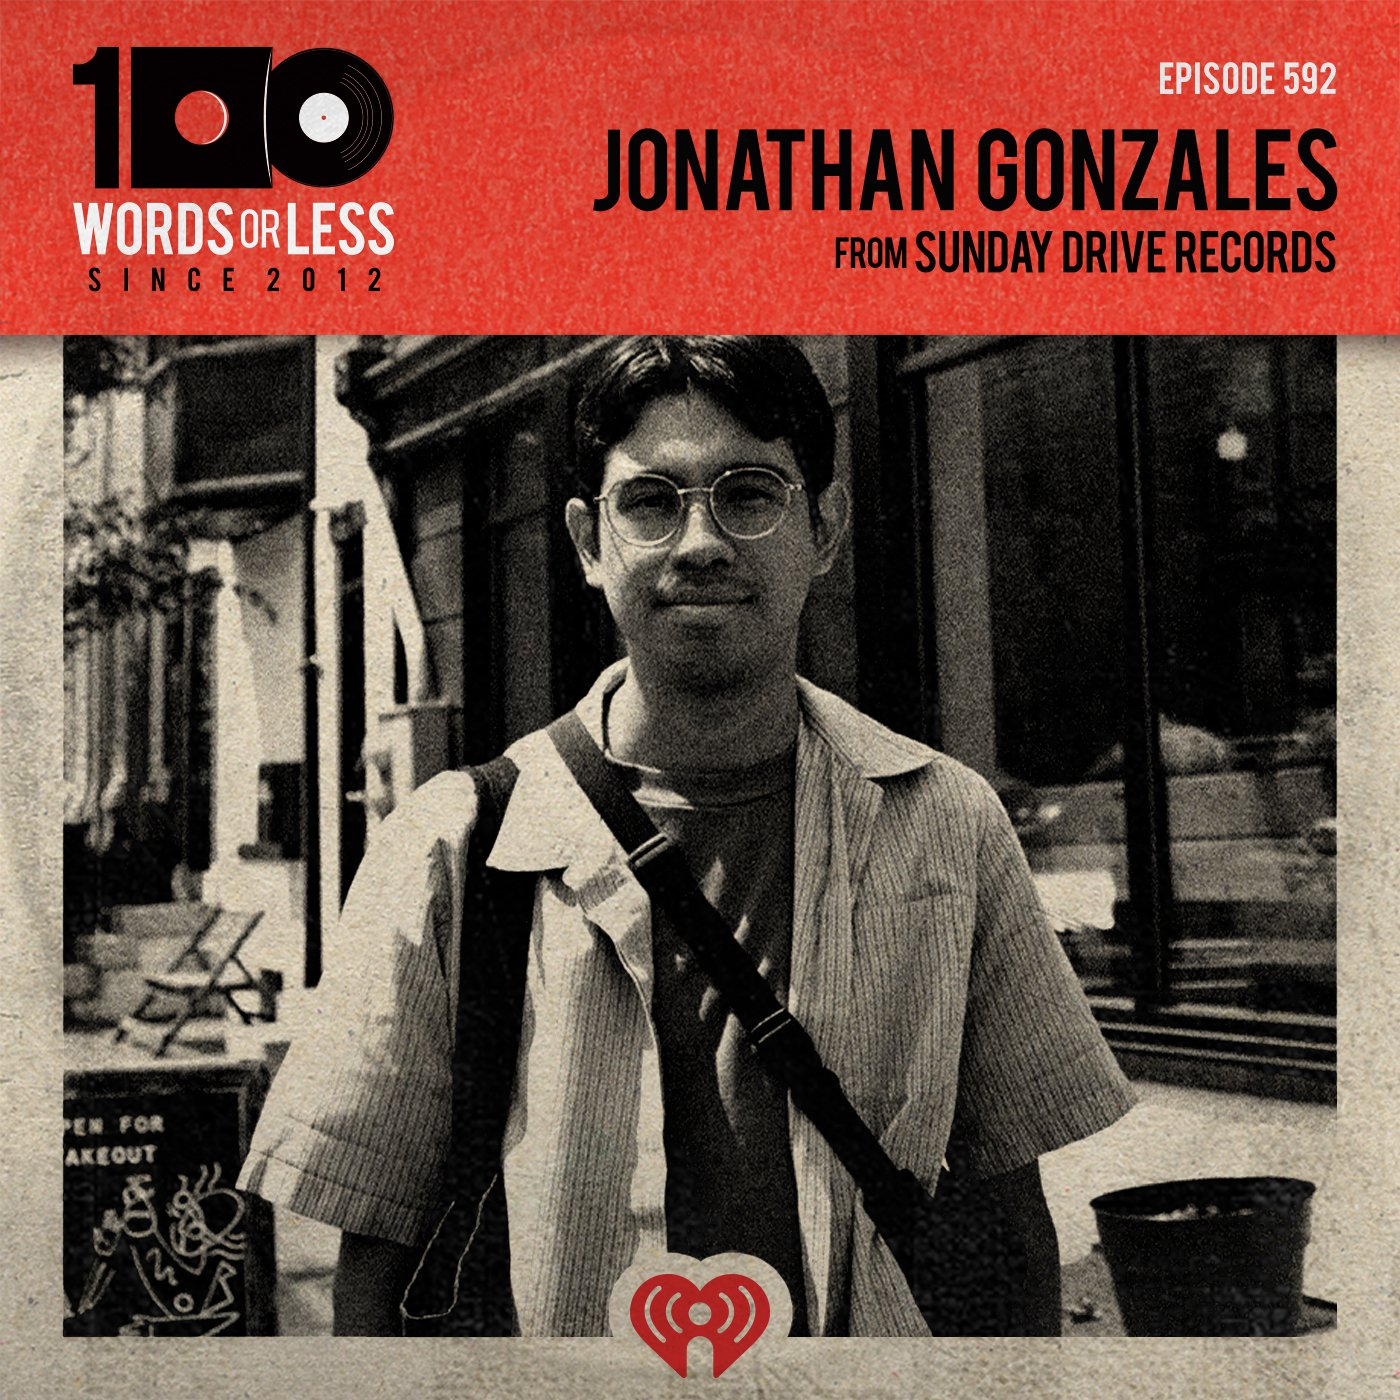 Jonathan Gonzales from Sunday Drive Records